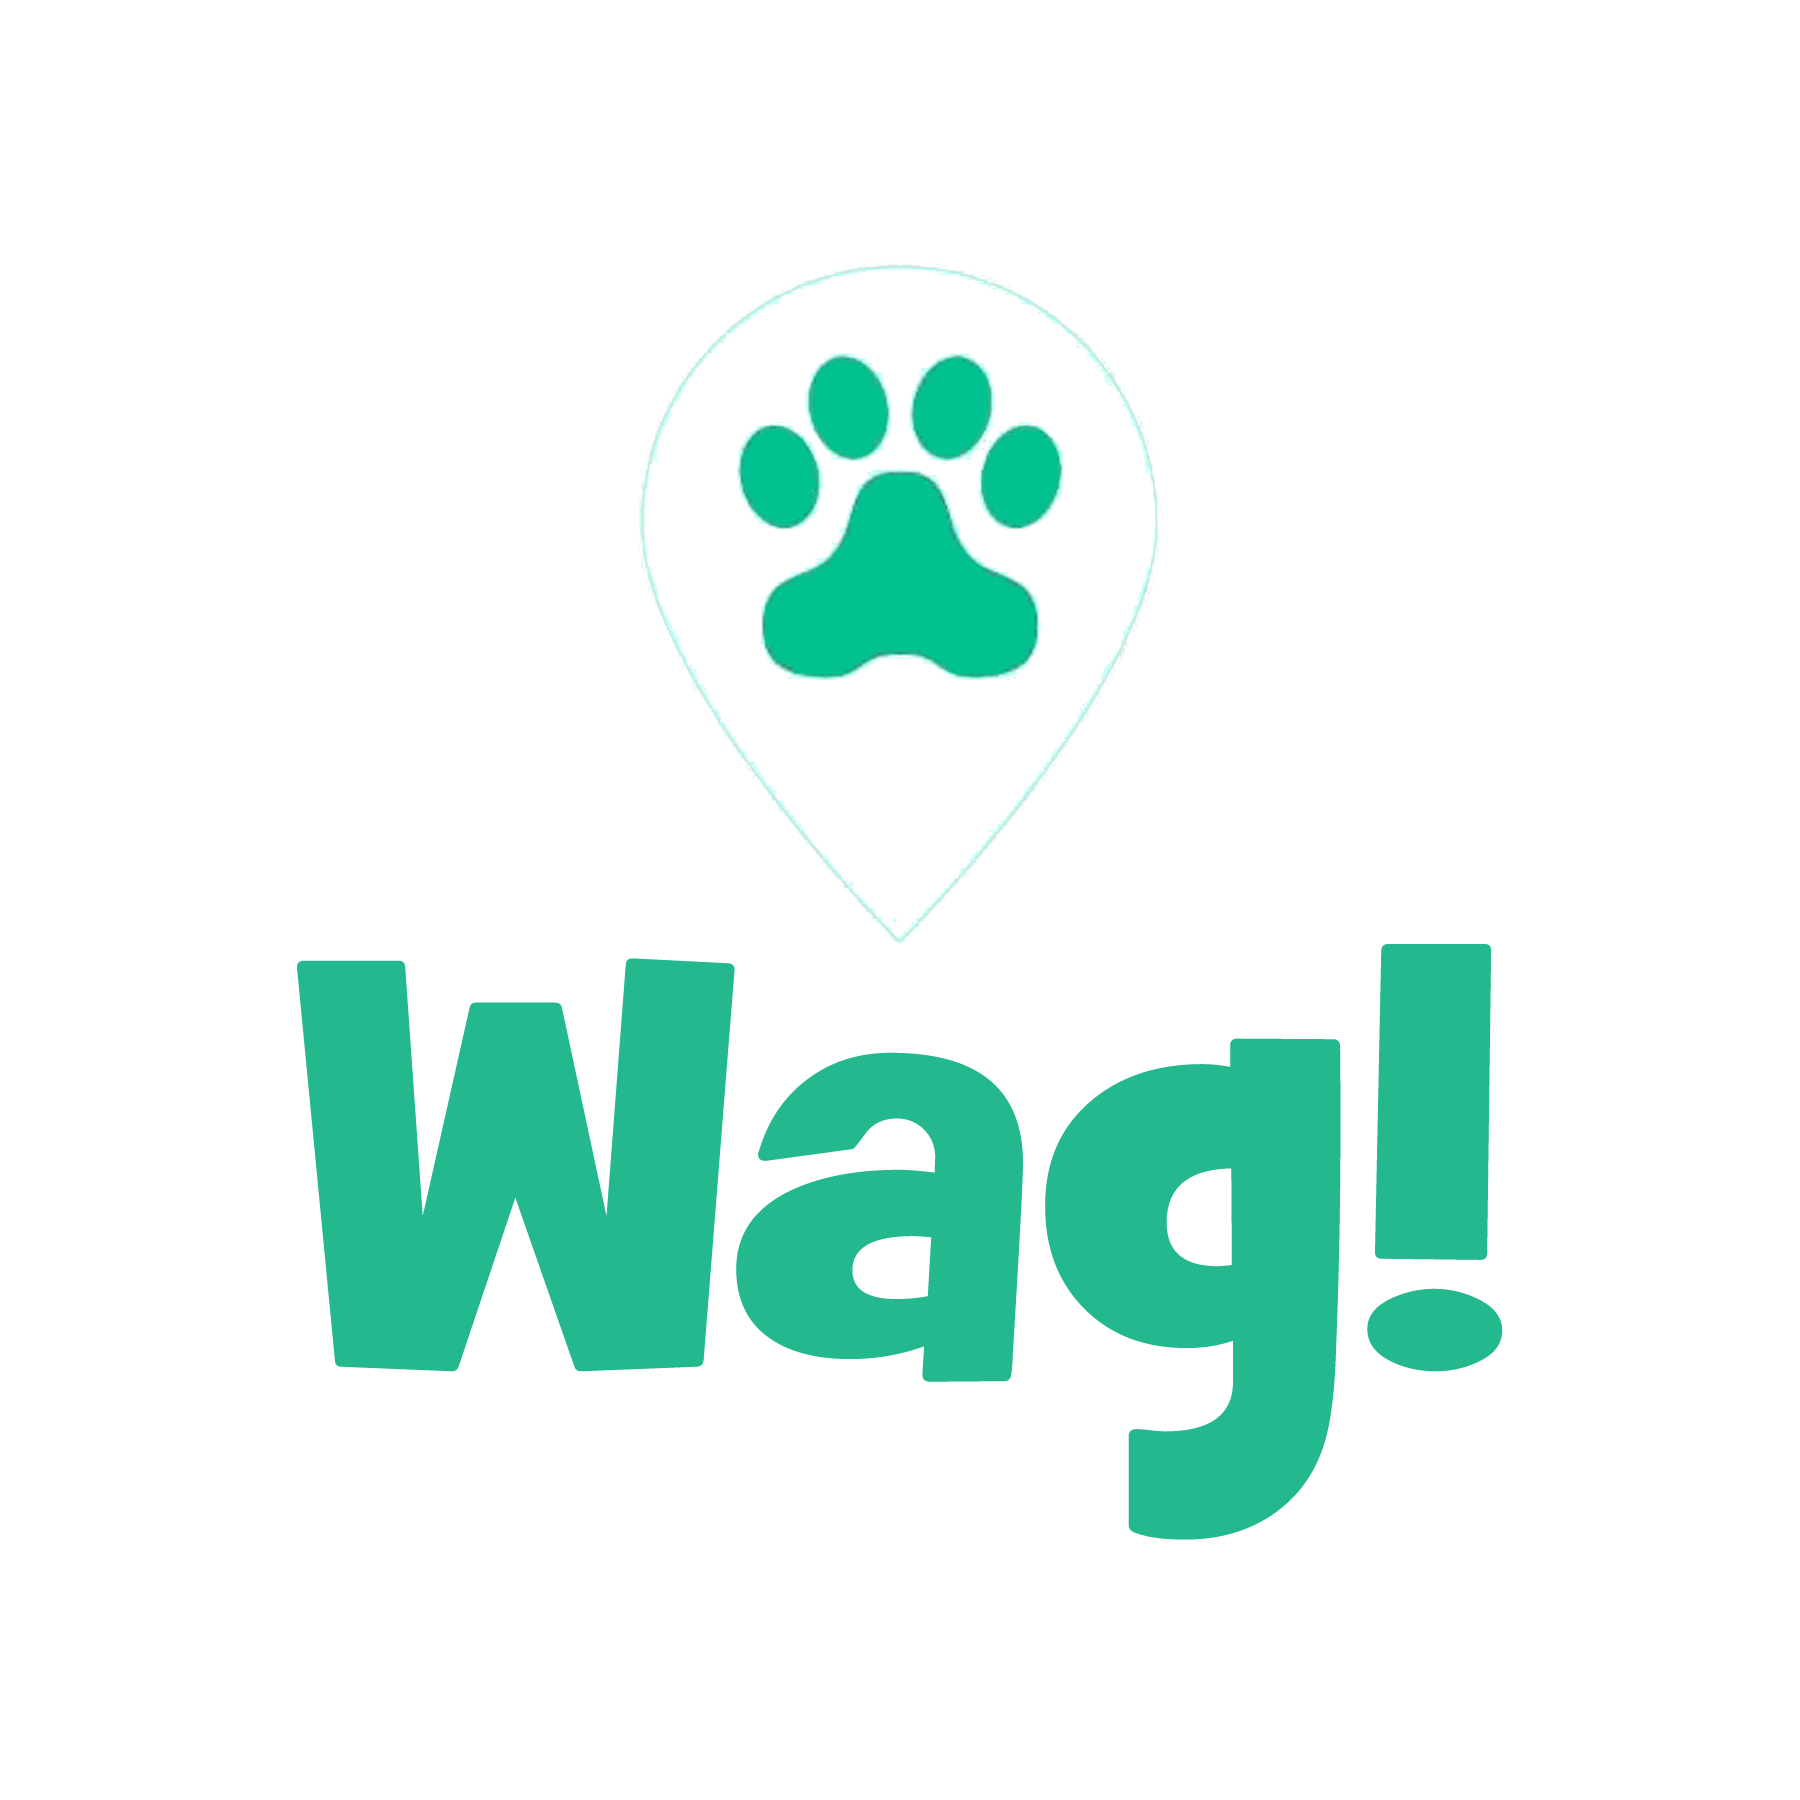 Let's talk Wag!